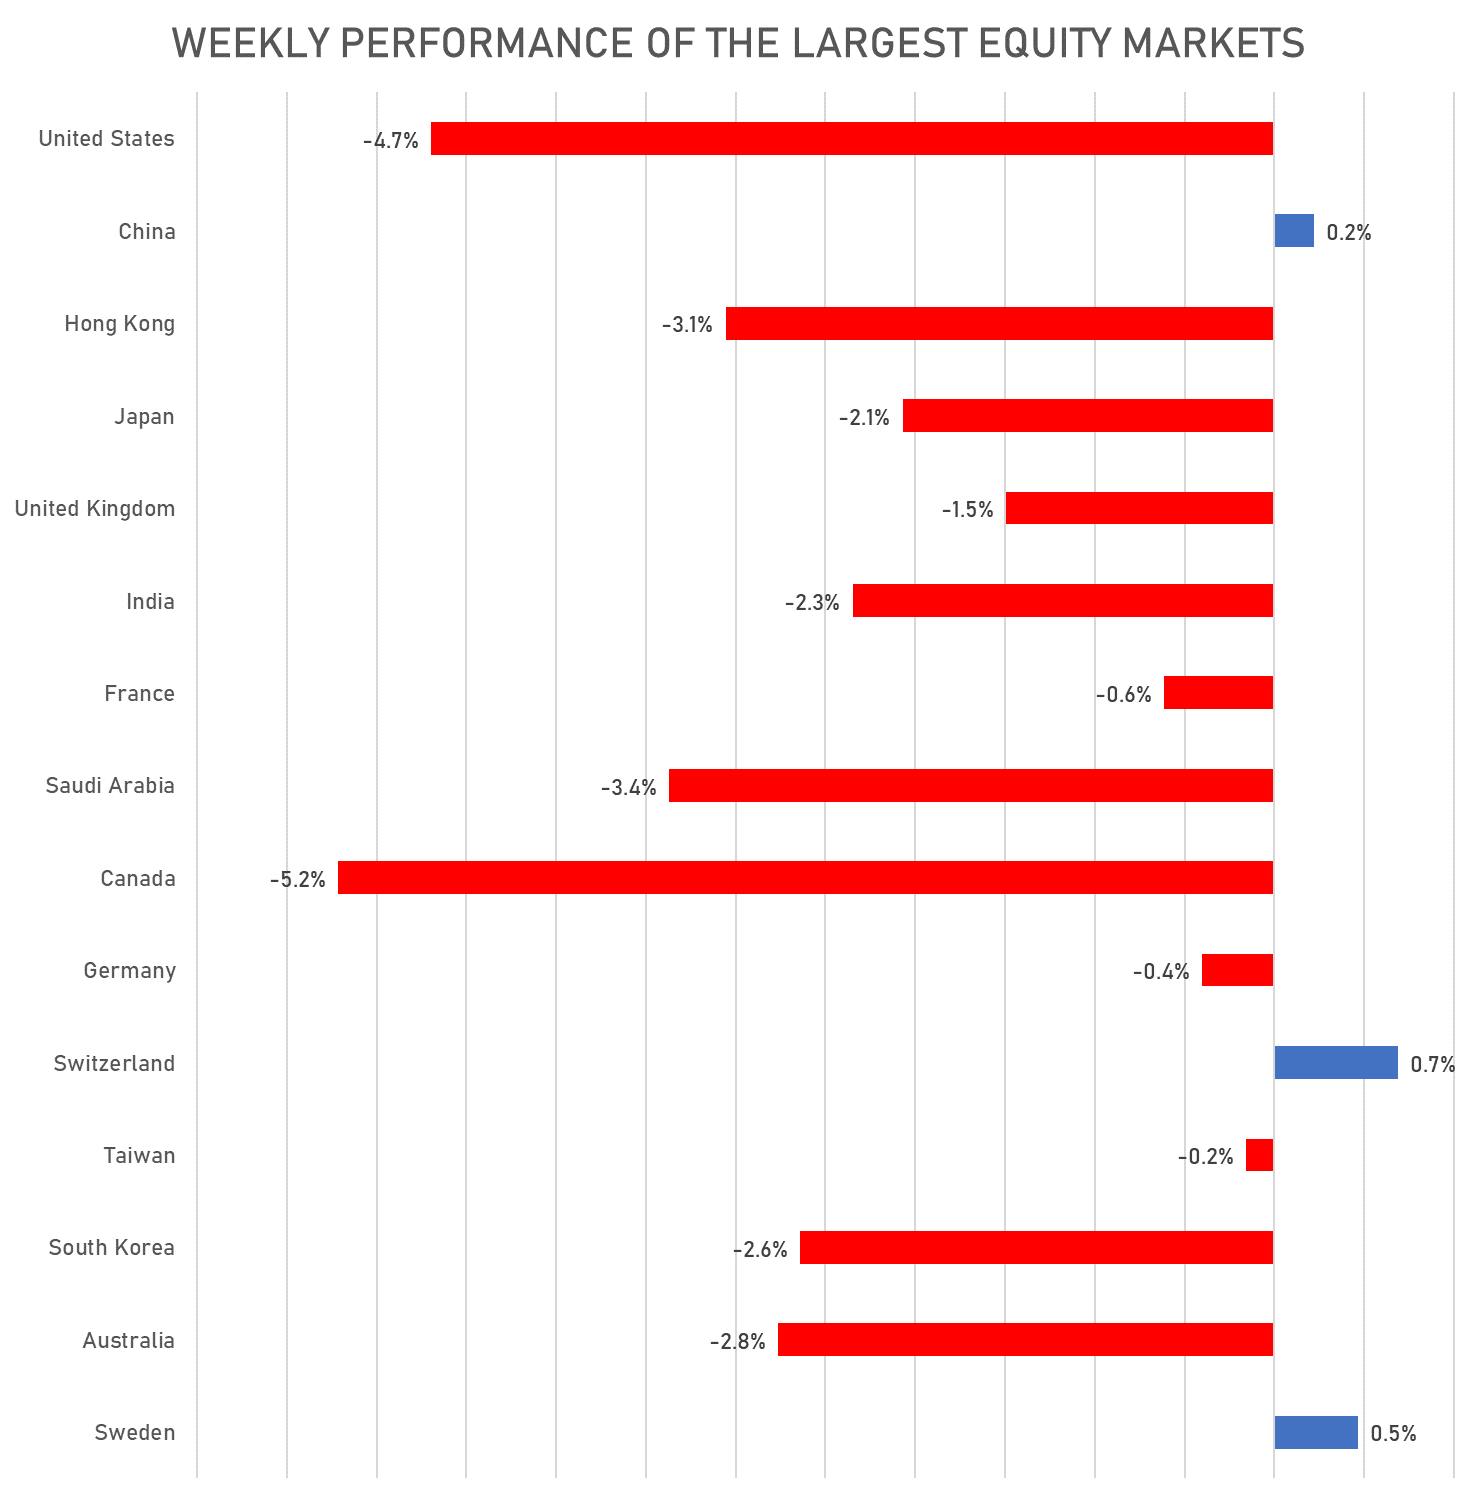 Weekly Performance Of the Largest Equity Markets | Sources: phipost.com, FactSet data